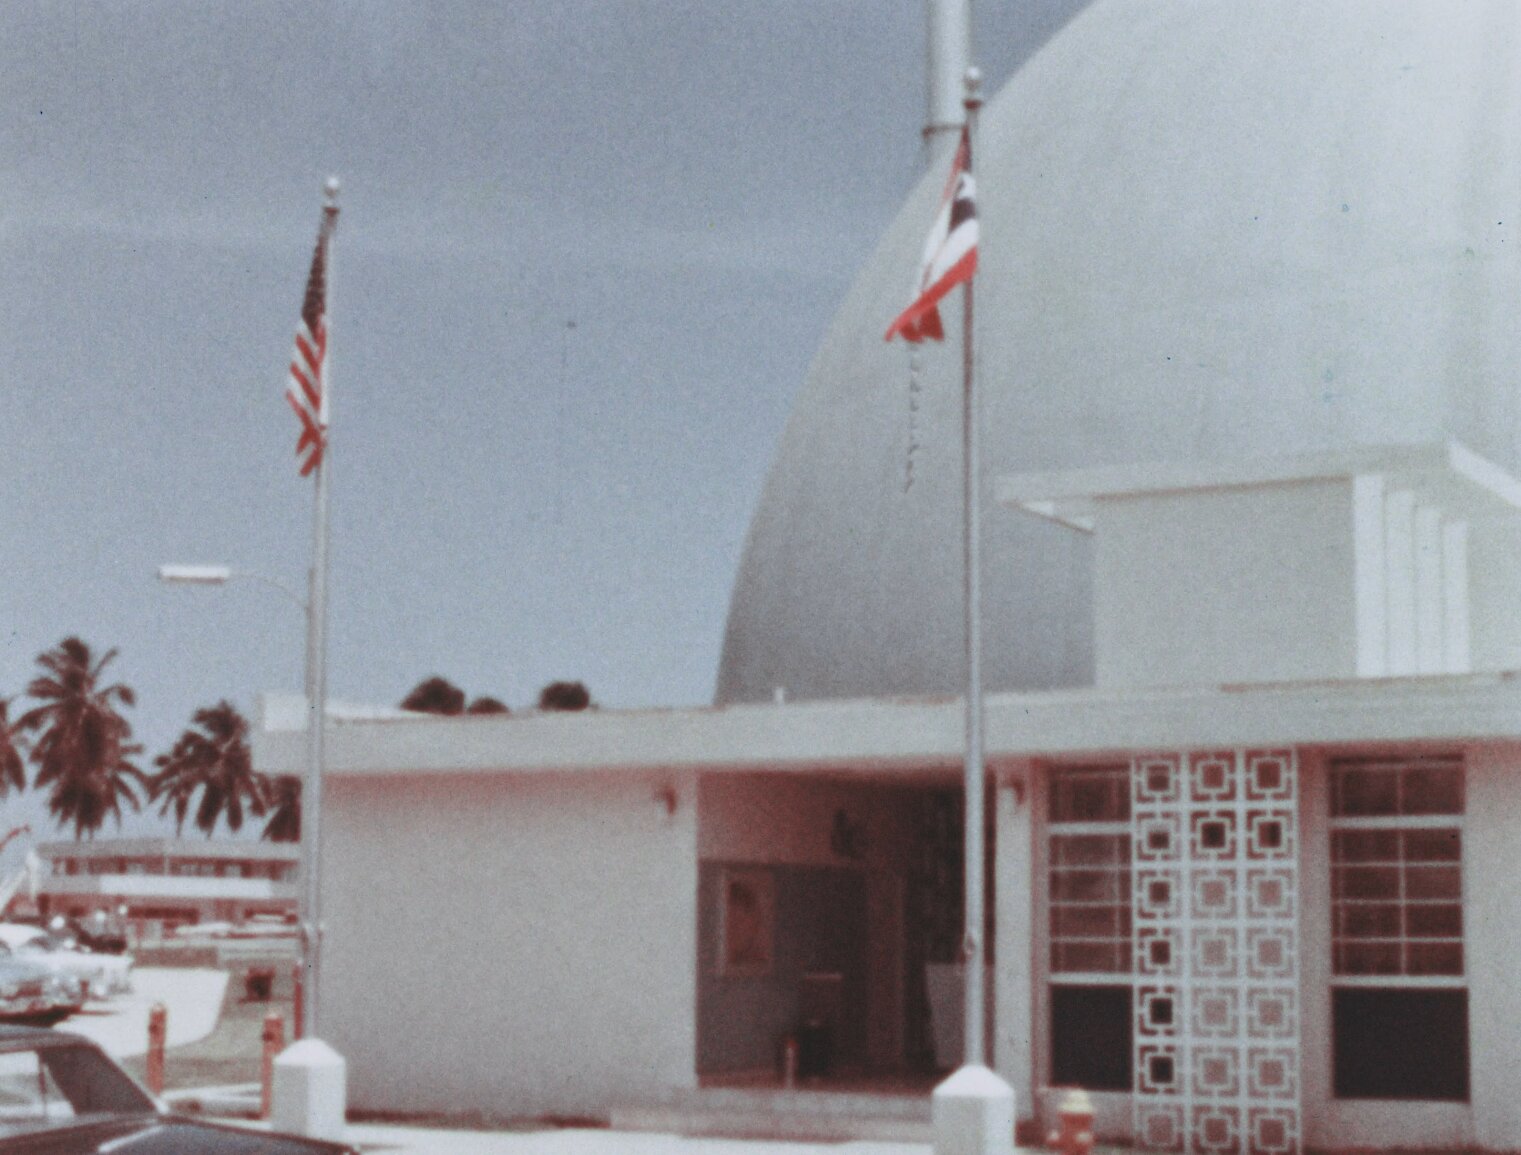 The front door to the bonus building showing an american and Puerto Rican flag side by side. Dome and palm trees in background.